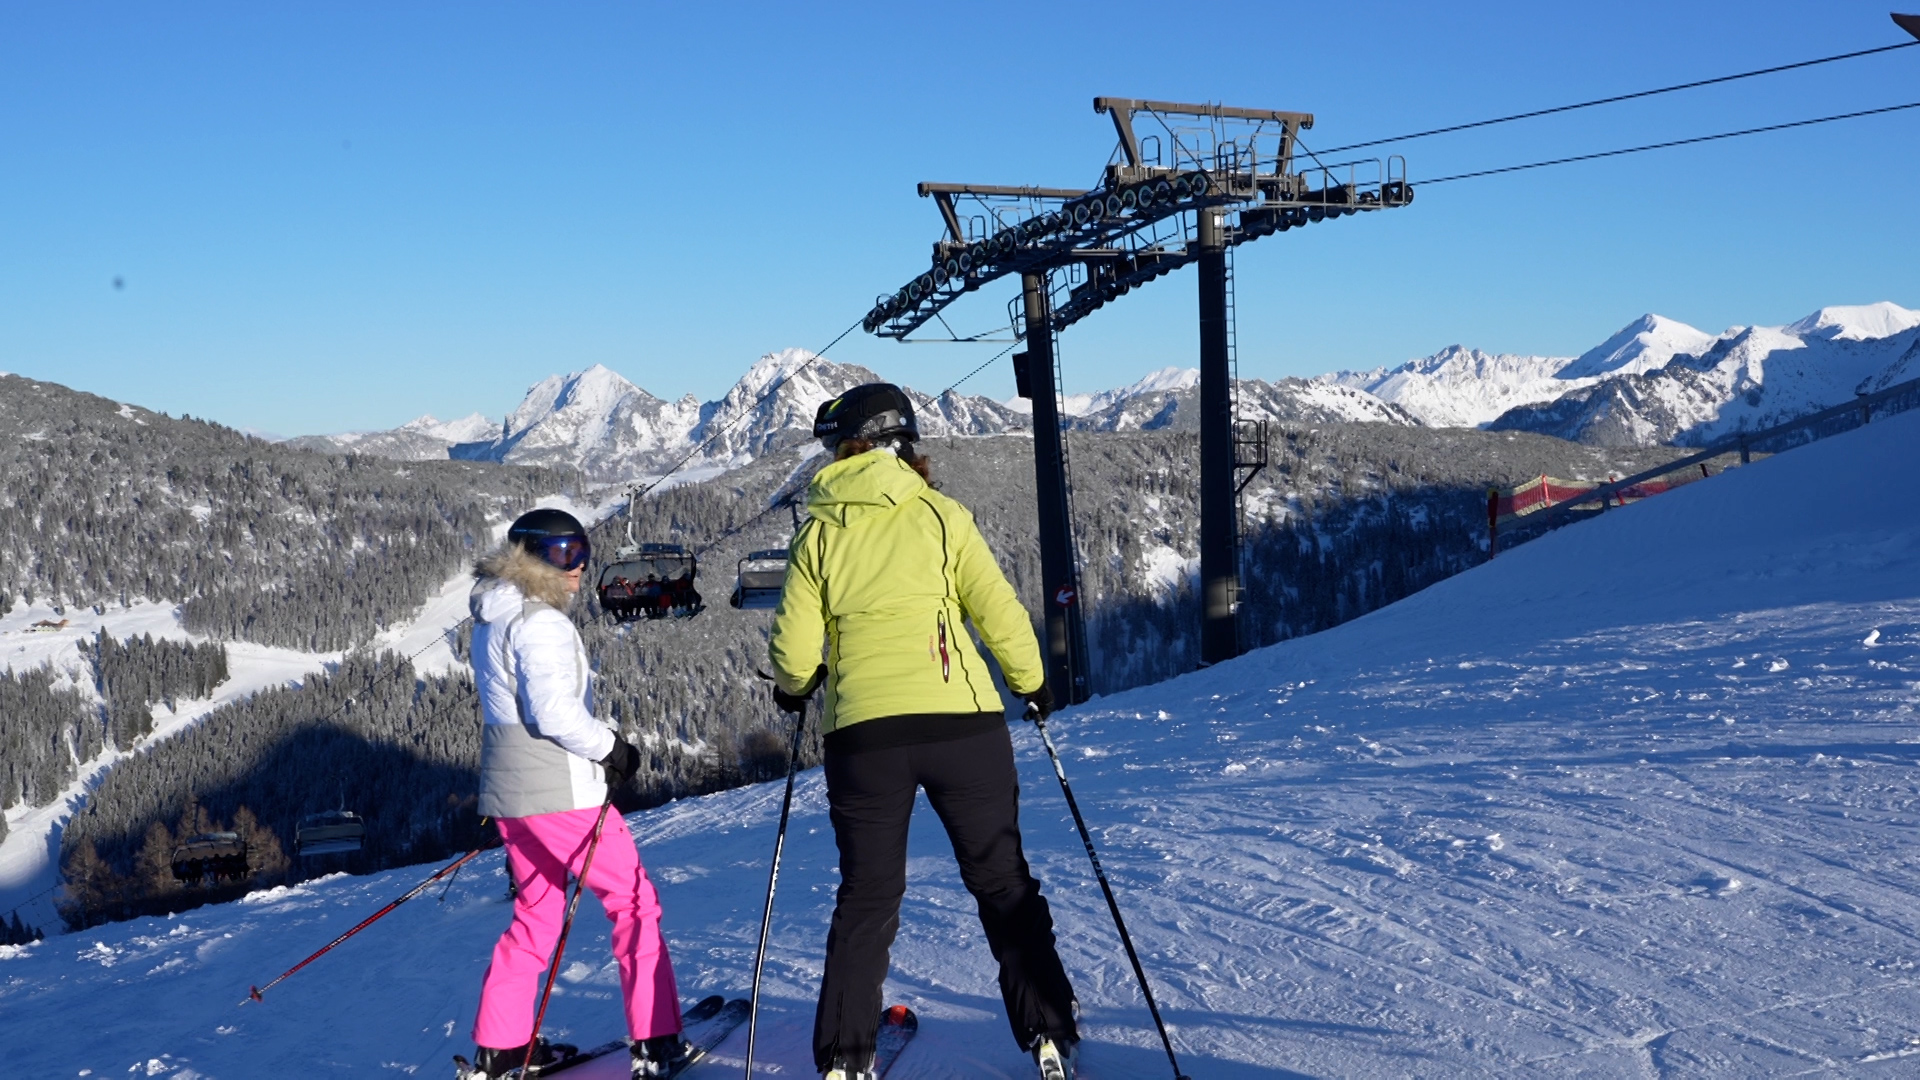 As soon as there are less people on the chairlift, the speed is lowered from 5 meters per second to 3 meters per second./CGTN/Andreas Gasser